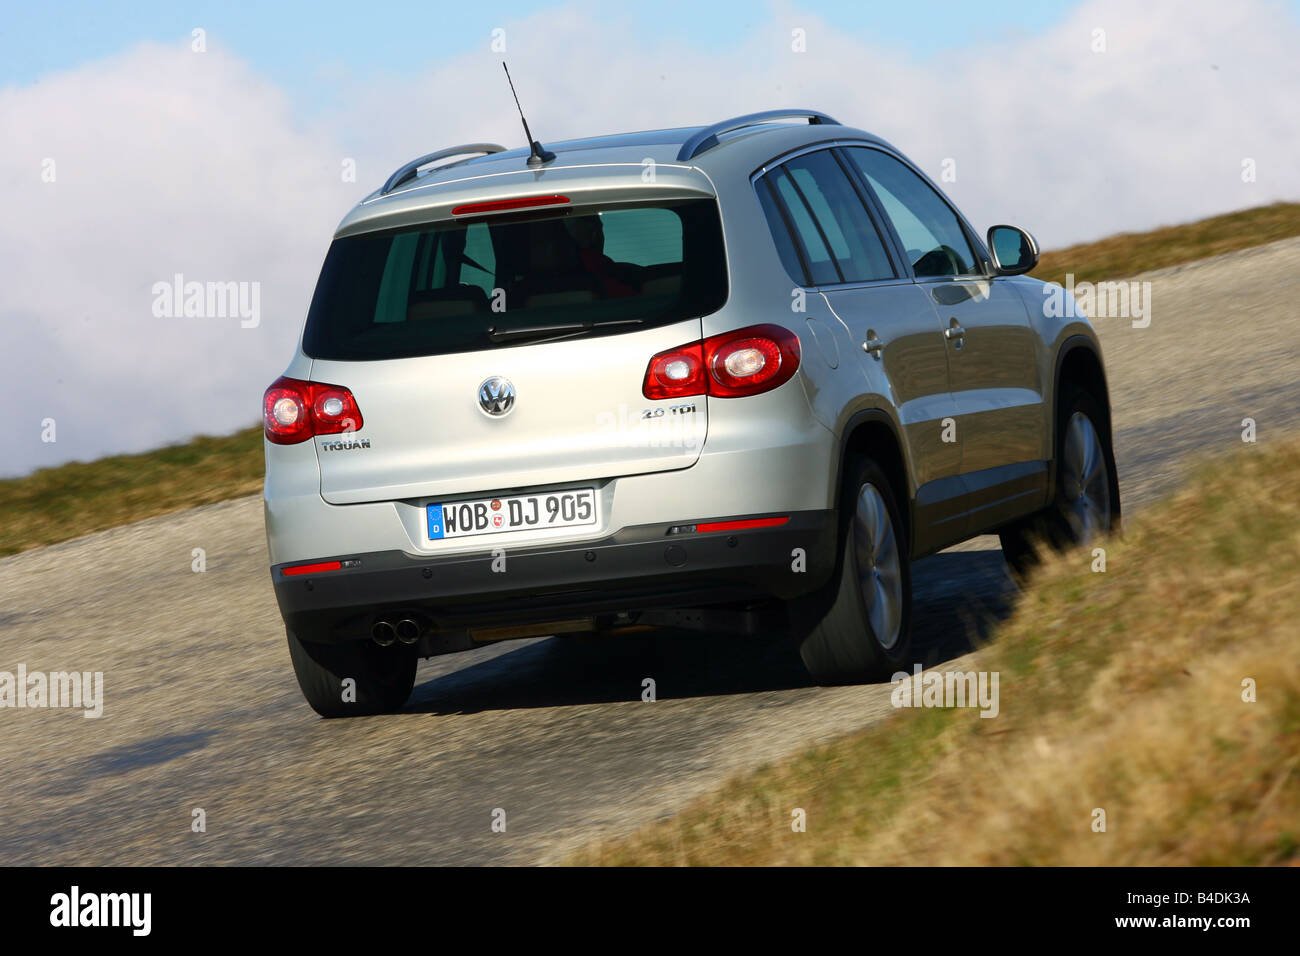 VW Volkswagen Tiguan 2.0 Sport & Style, model year 2007-, silver, driving, diagonal from the back, rear view, country road Stock Photo